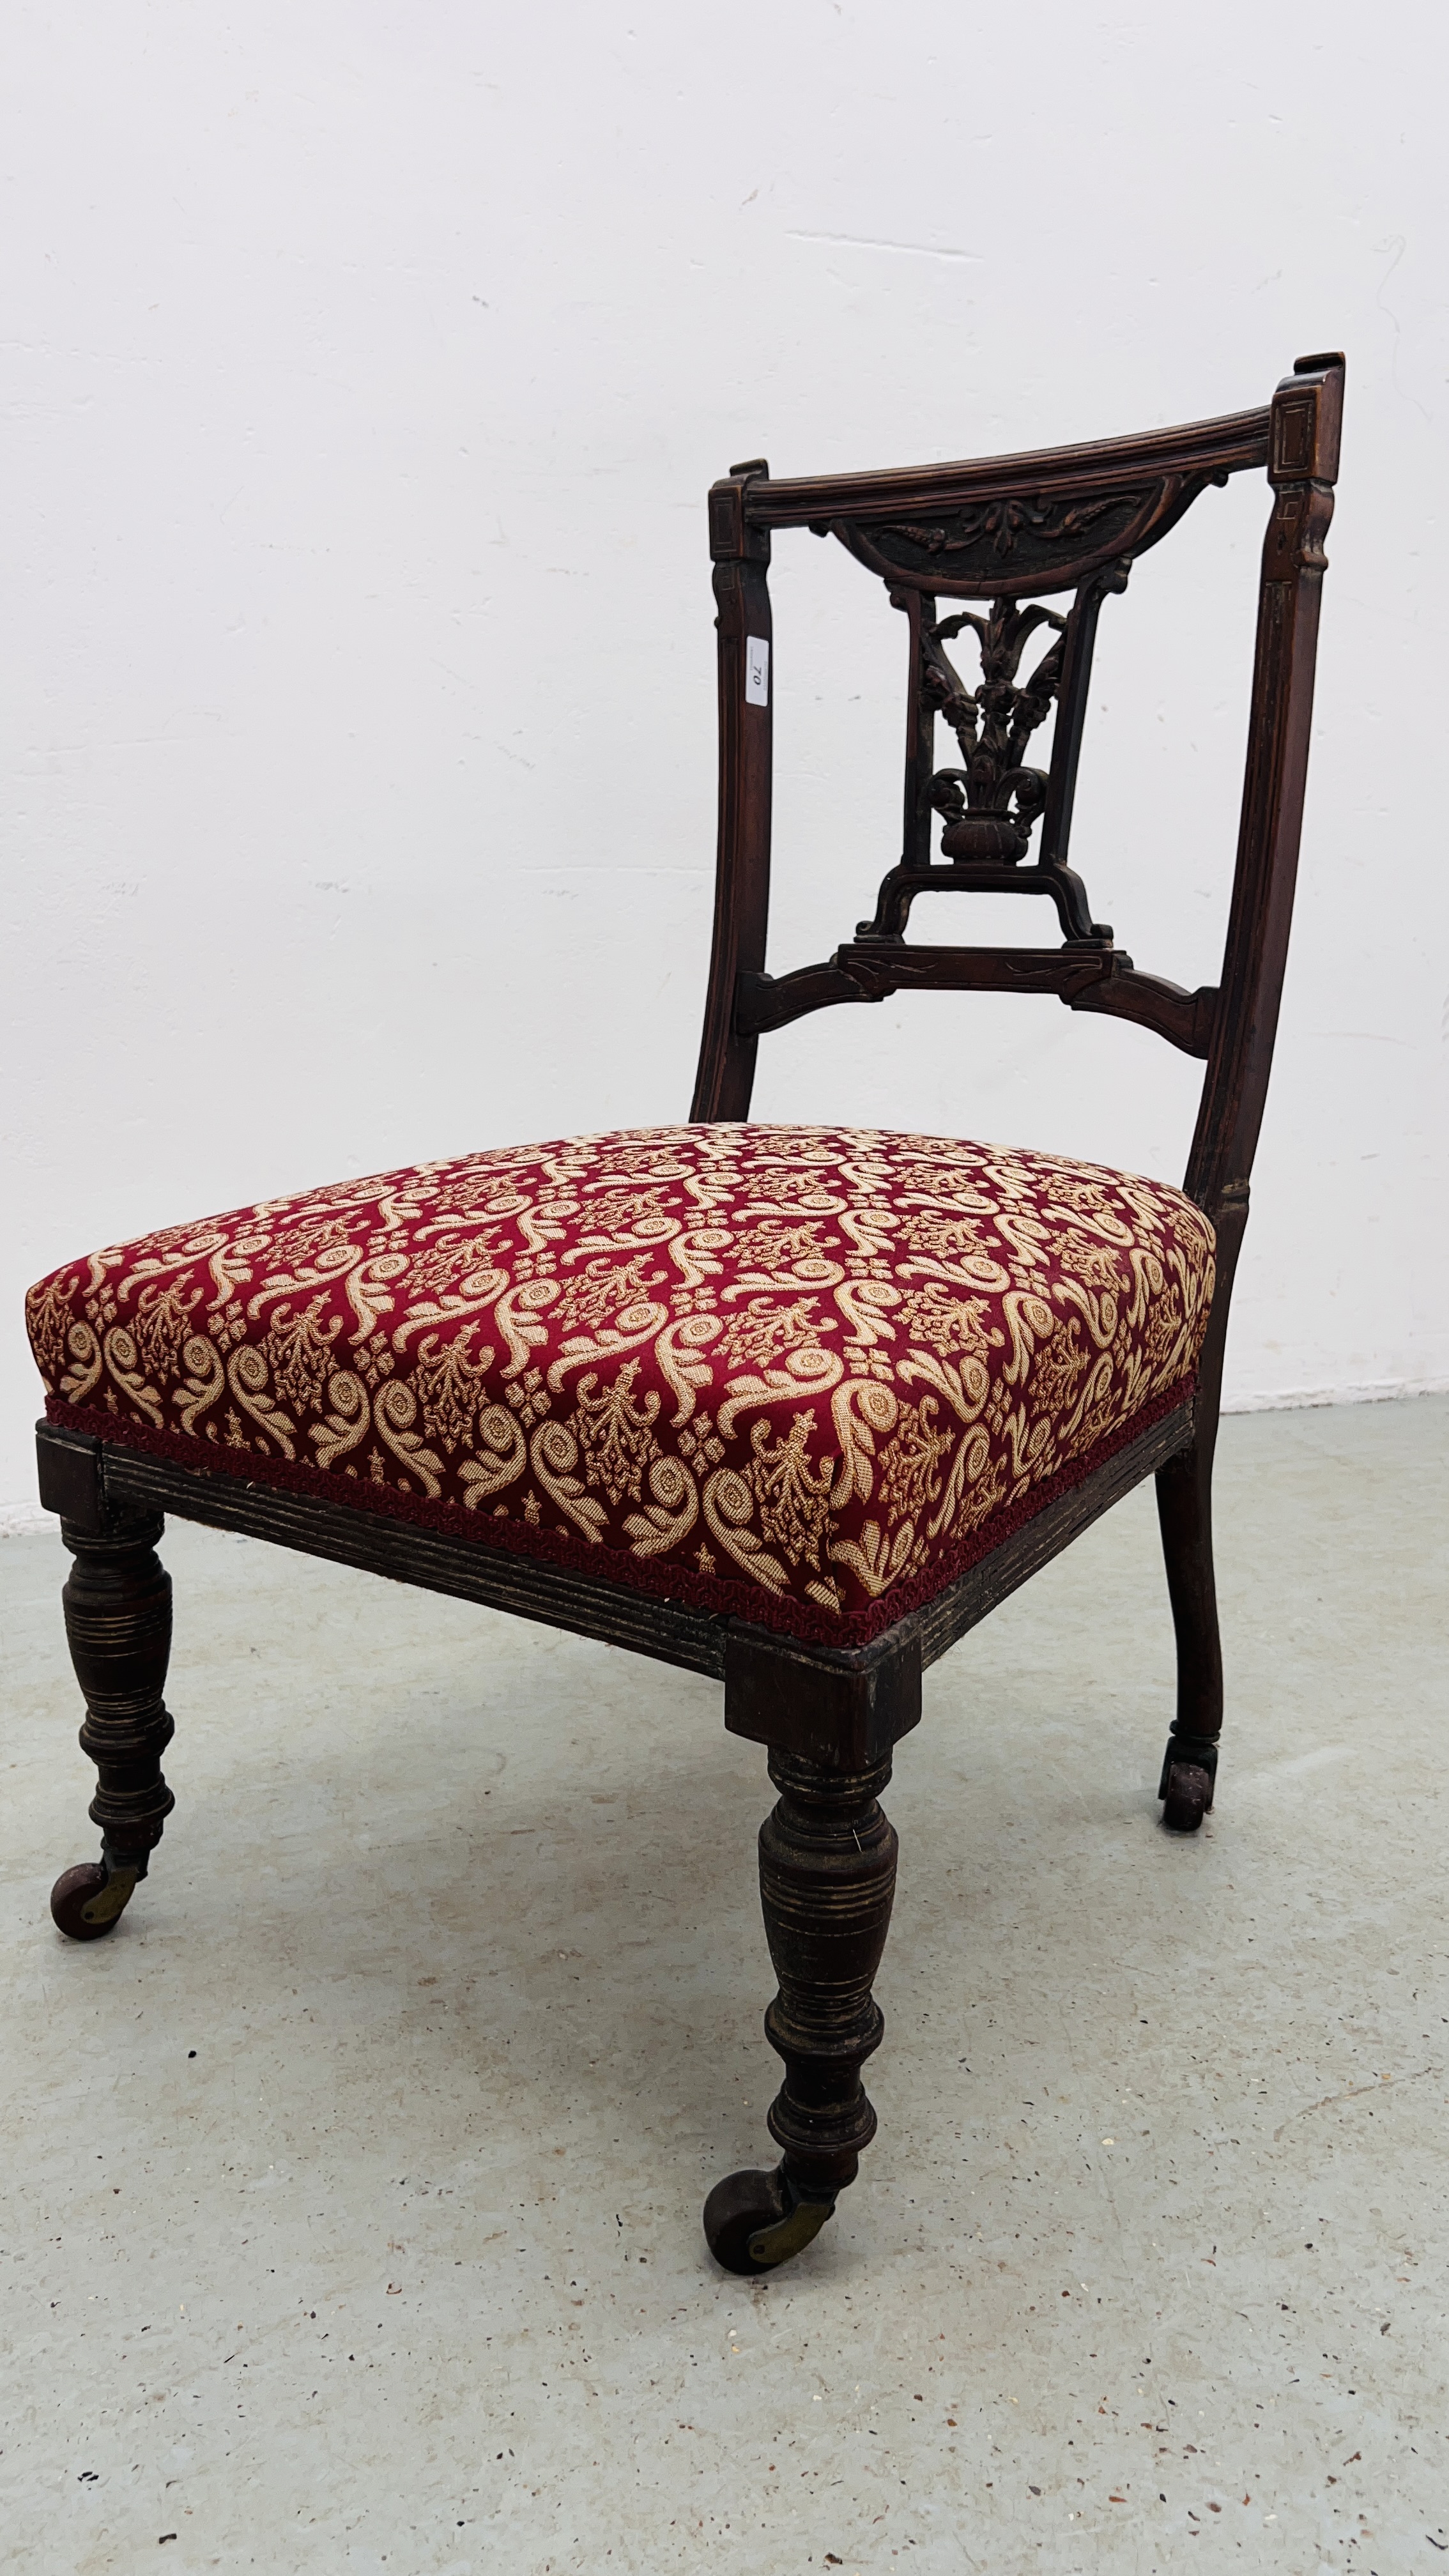 AN EDWARDIAN BEDROOM CHAIR WITH CARVED DETAILING AND UPHOLSTERED SEAT.